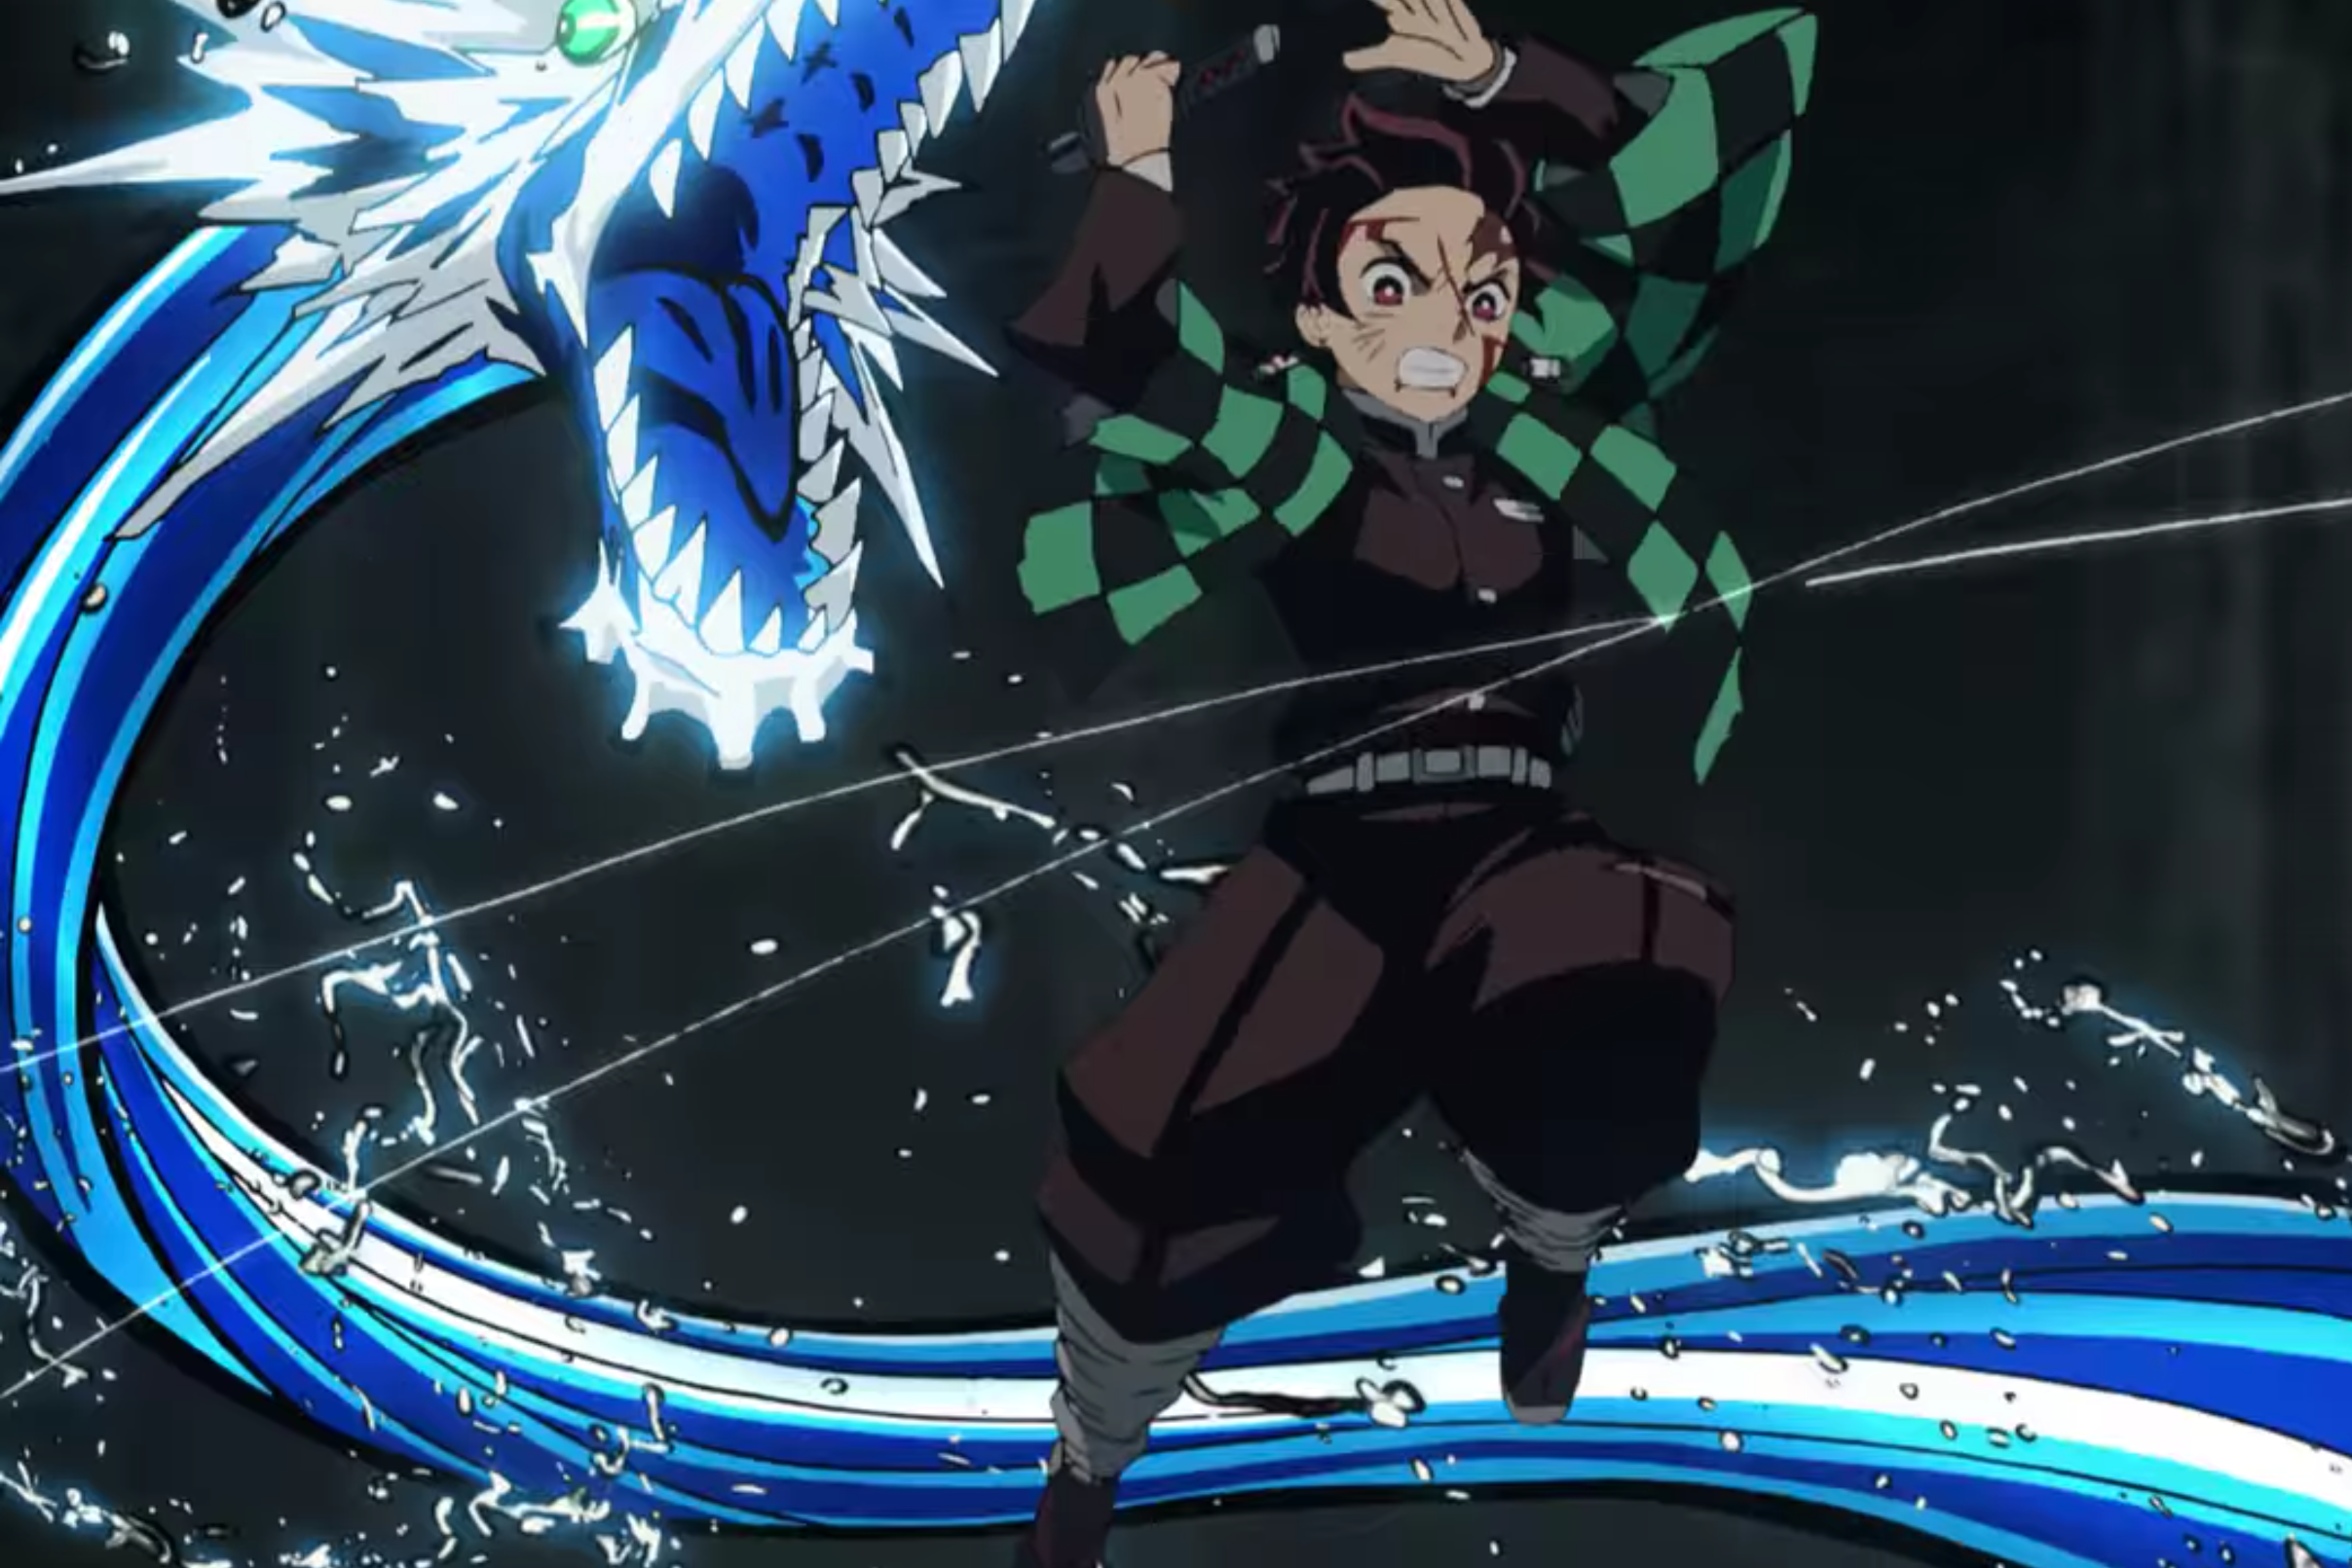 Demon Slayer on Netflix: Why you should stream Japan's biggest box-office  hit of all time.